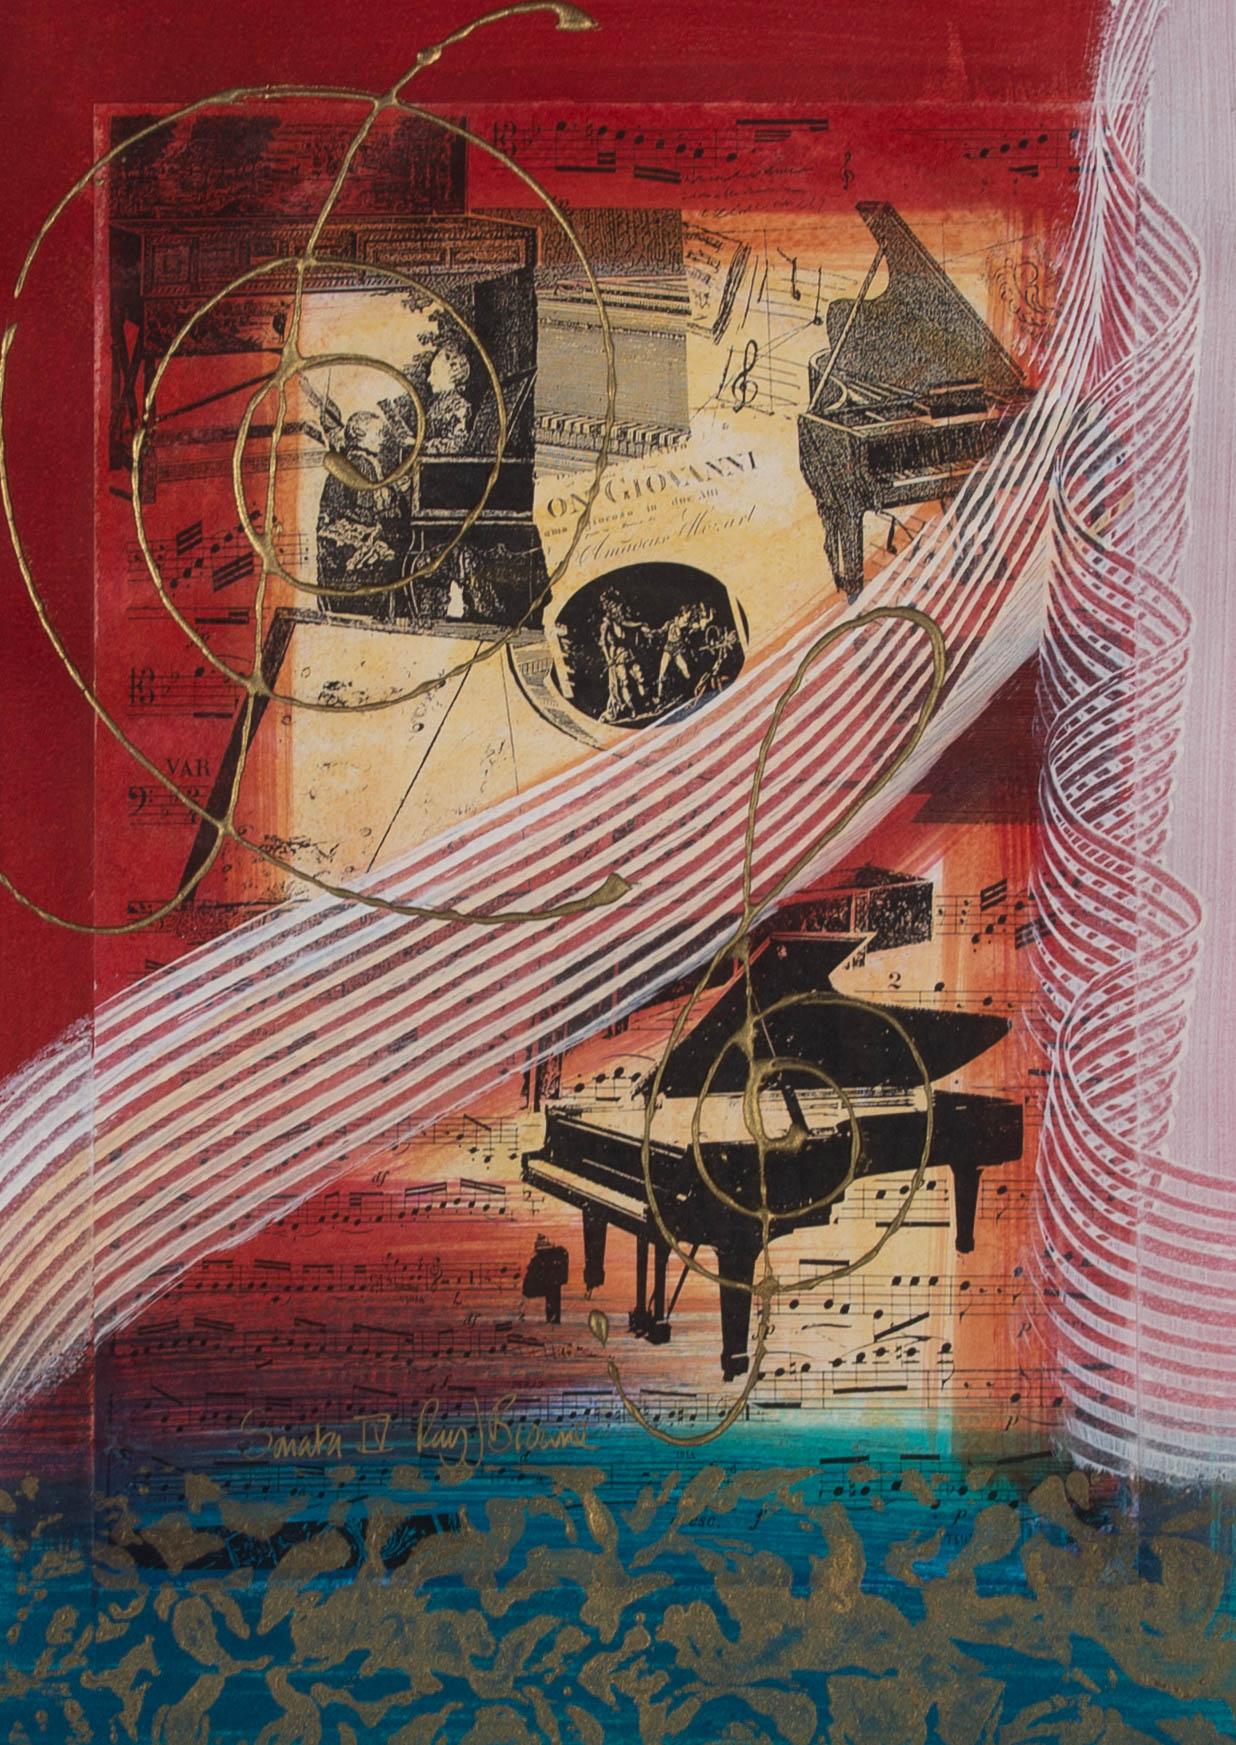 A dynamic mixed media piece inspired by classical music. The artist has used sweeping directional areas of paint over collage to create a vibrant, aesthetically pleasing piece. The artwork has been signed and inscribed at the lower edge and